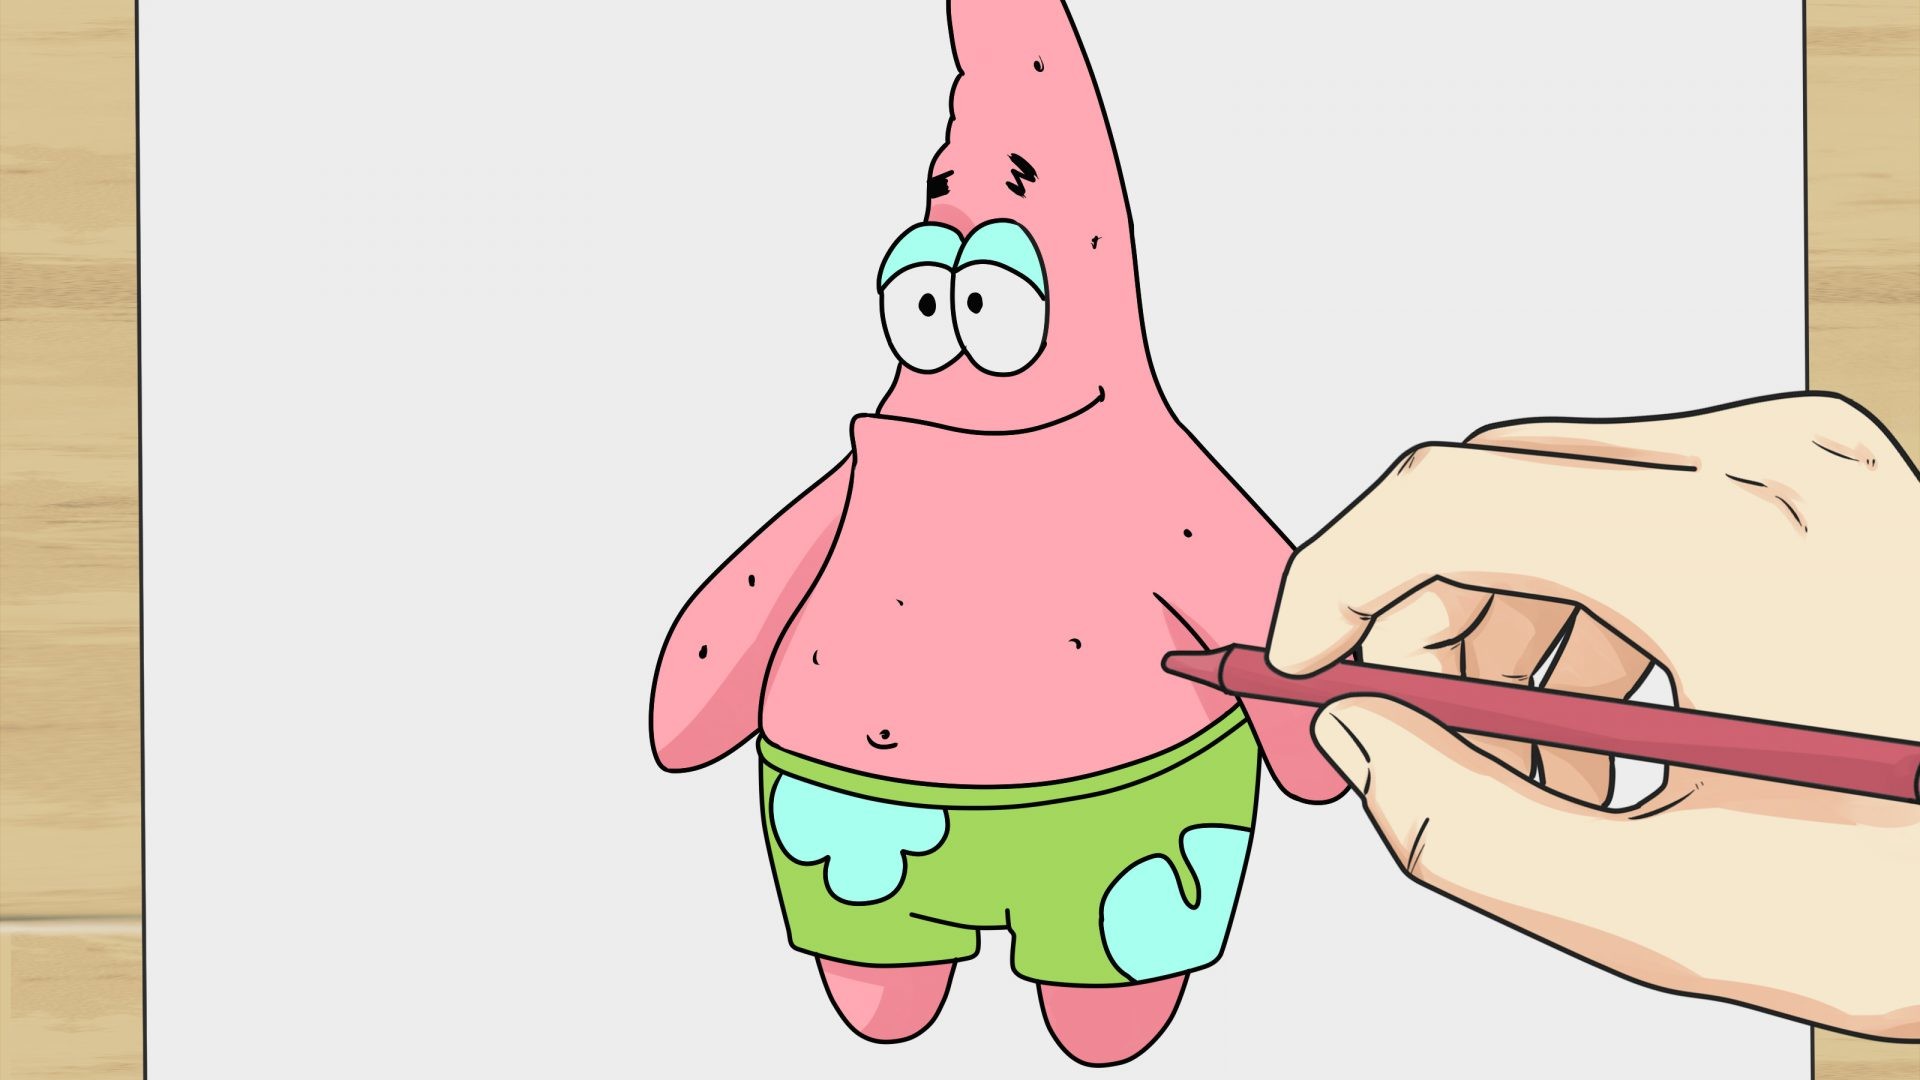 1920x1080 Spongebob cartoon drawings how to draw color funny squarepants meme easy  step stupendous coloring pages jpg